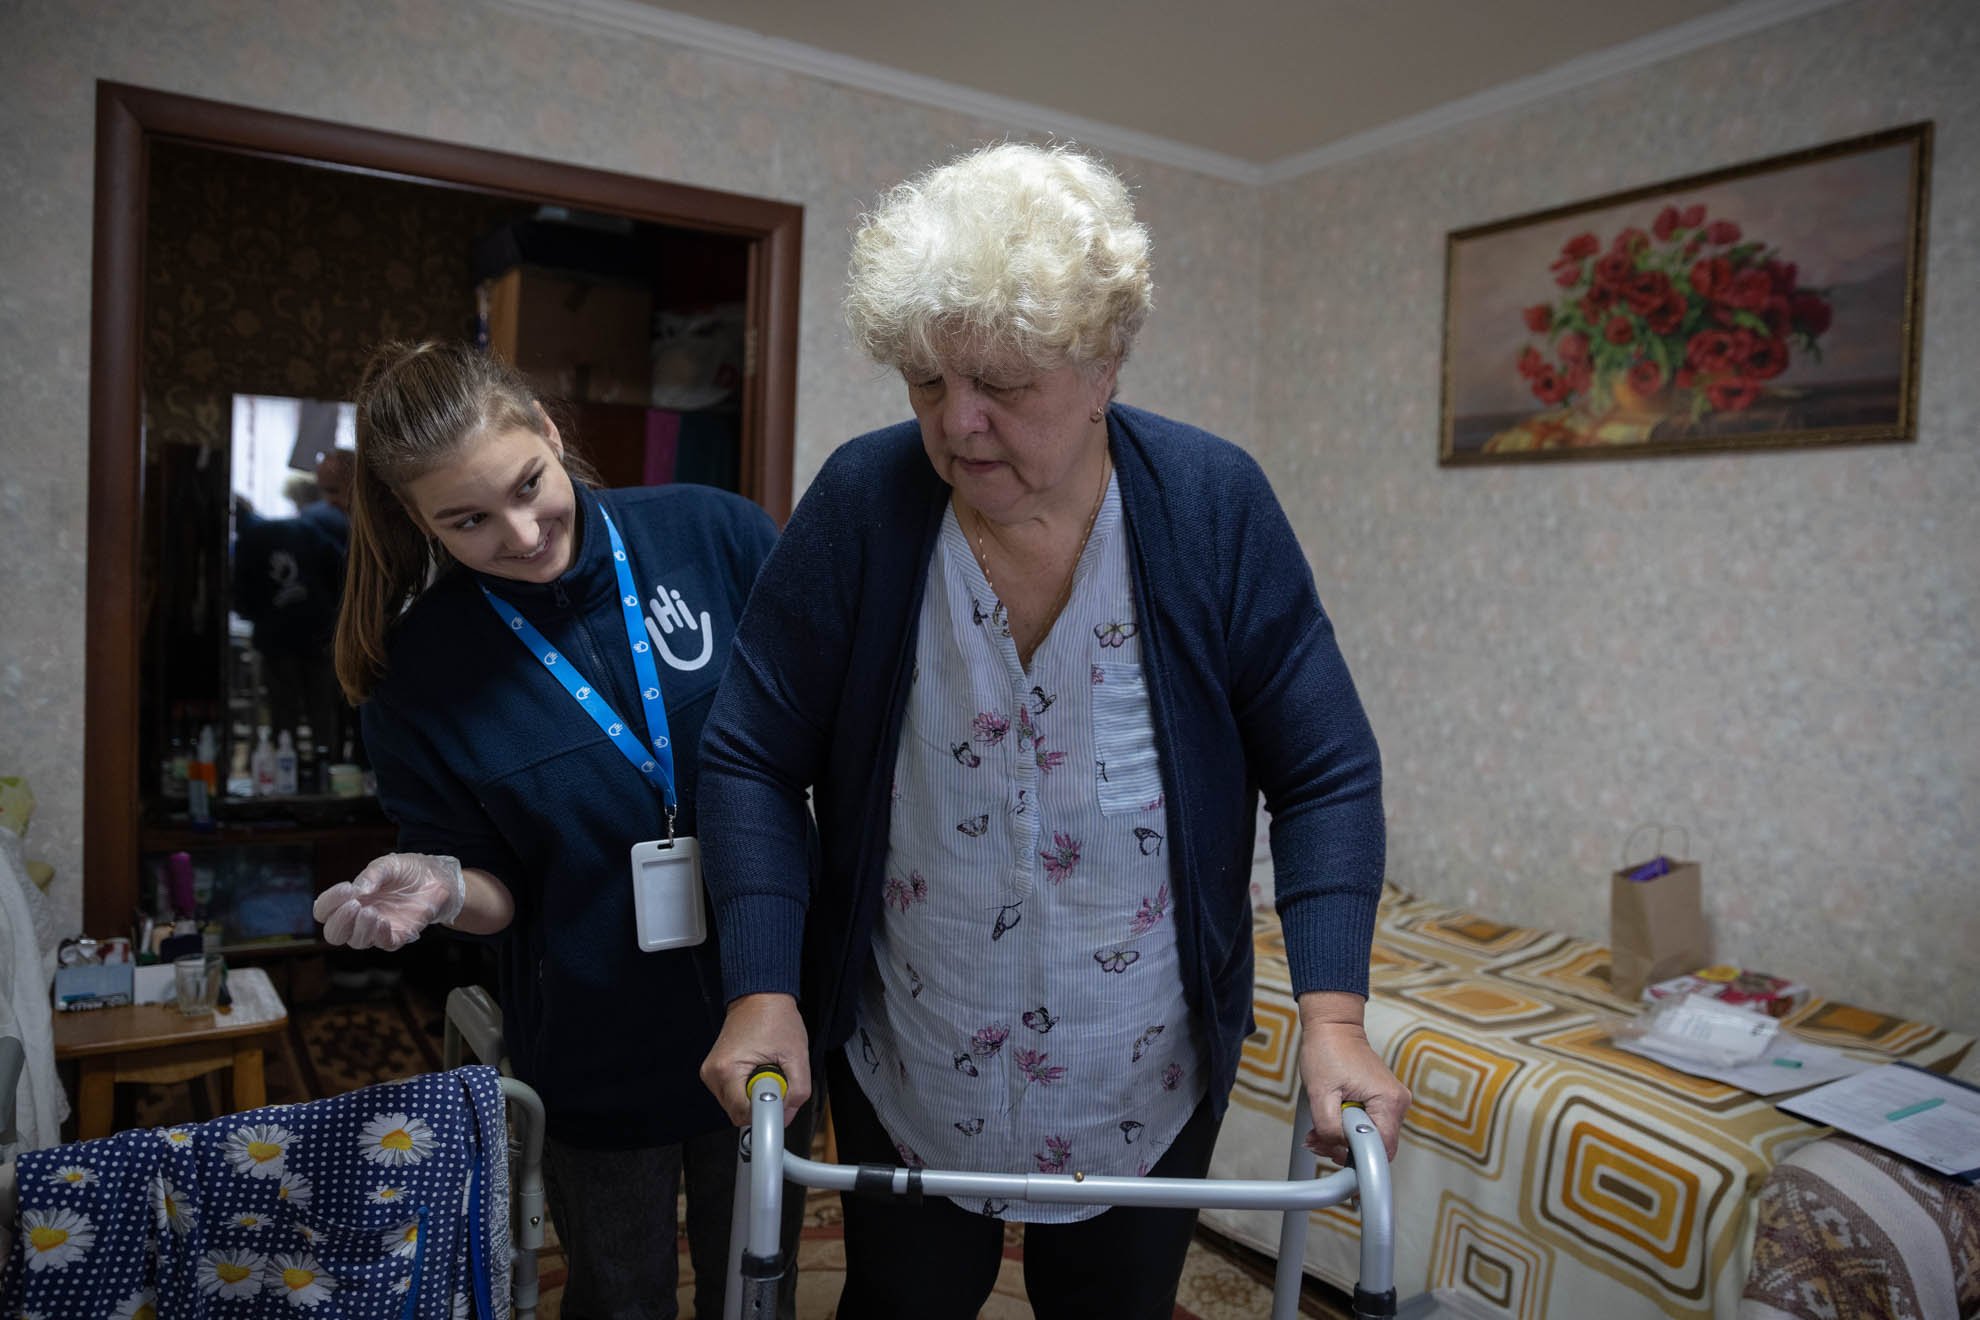 HI’s staff is smiling at Antonina while she is using her walker in her house.